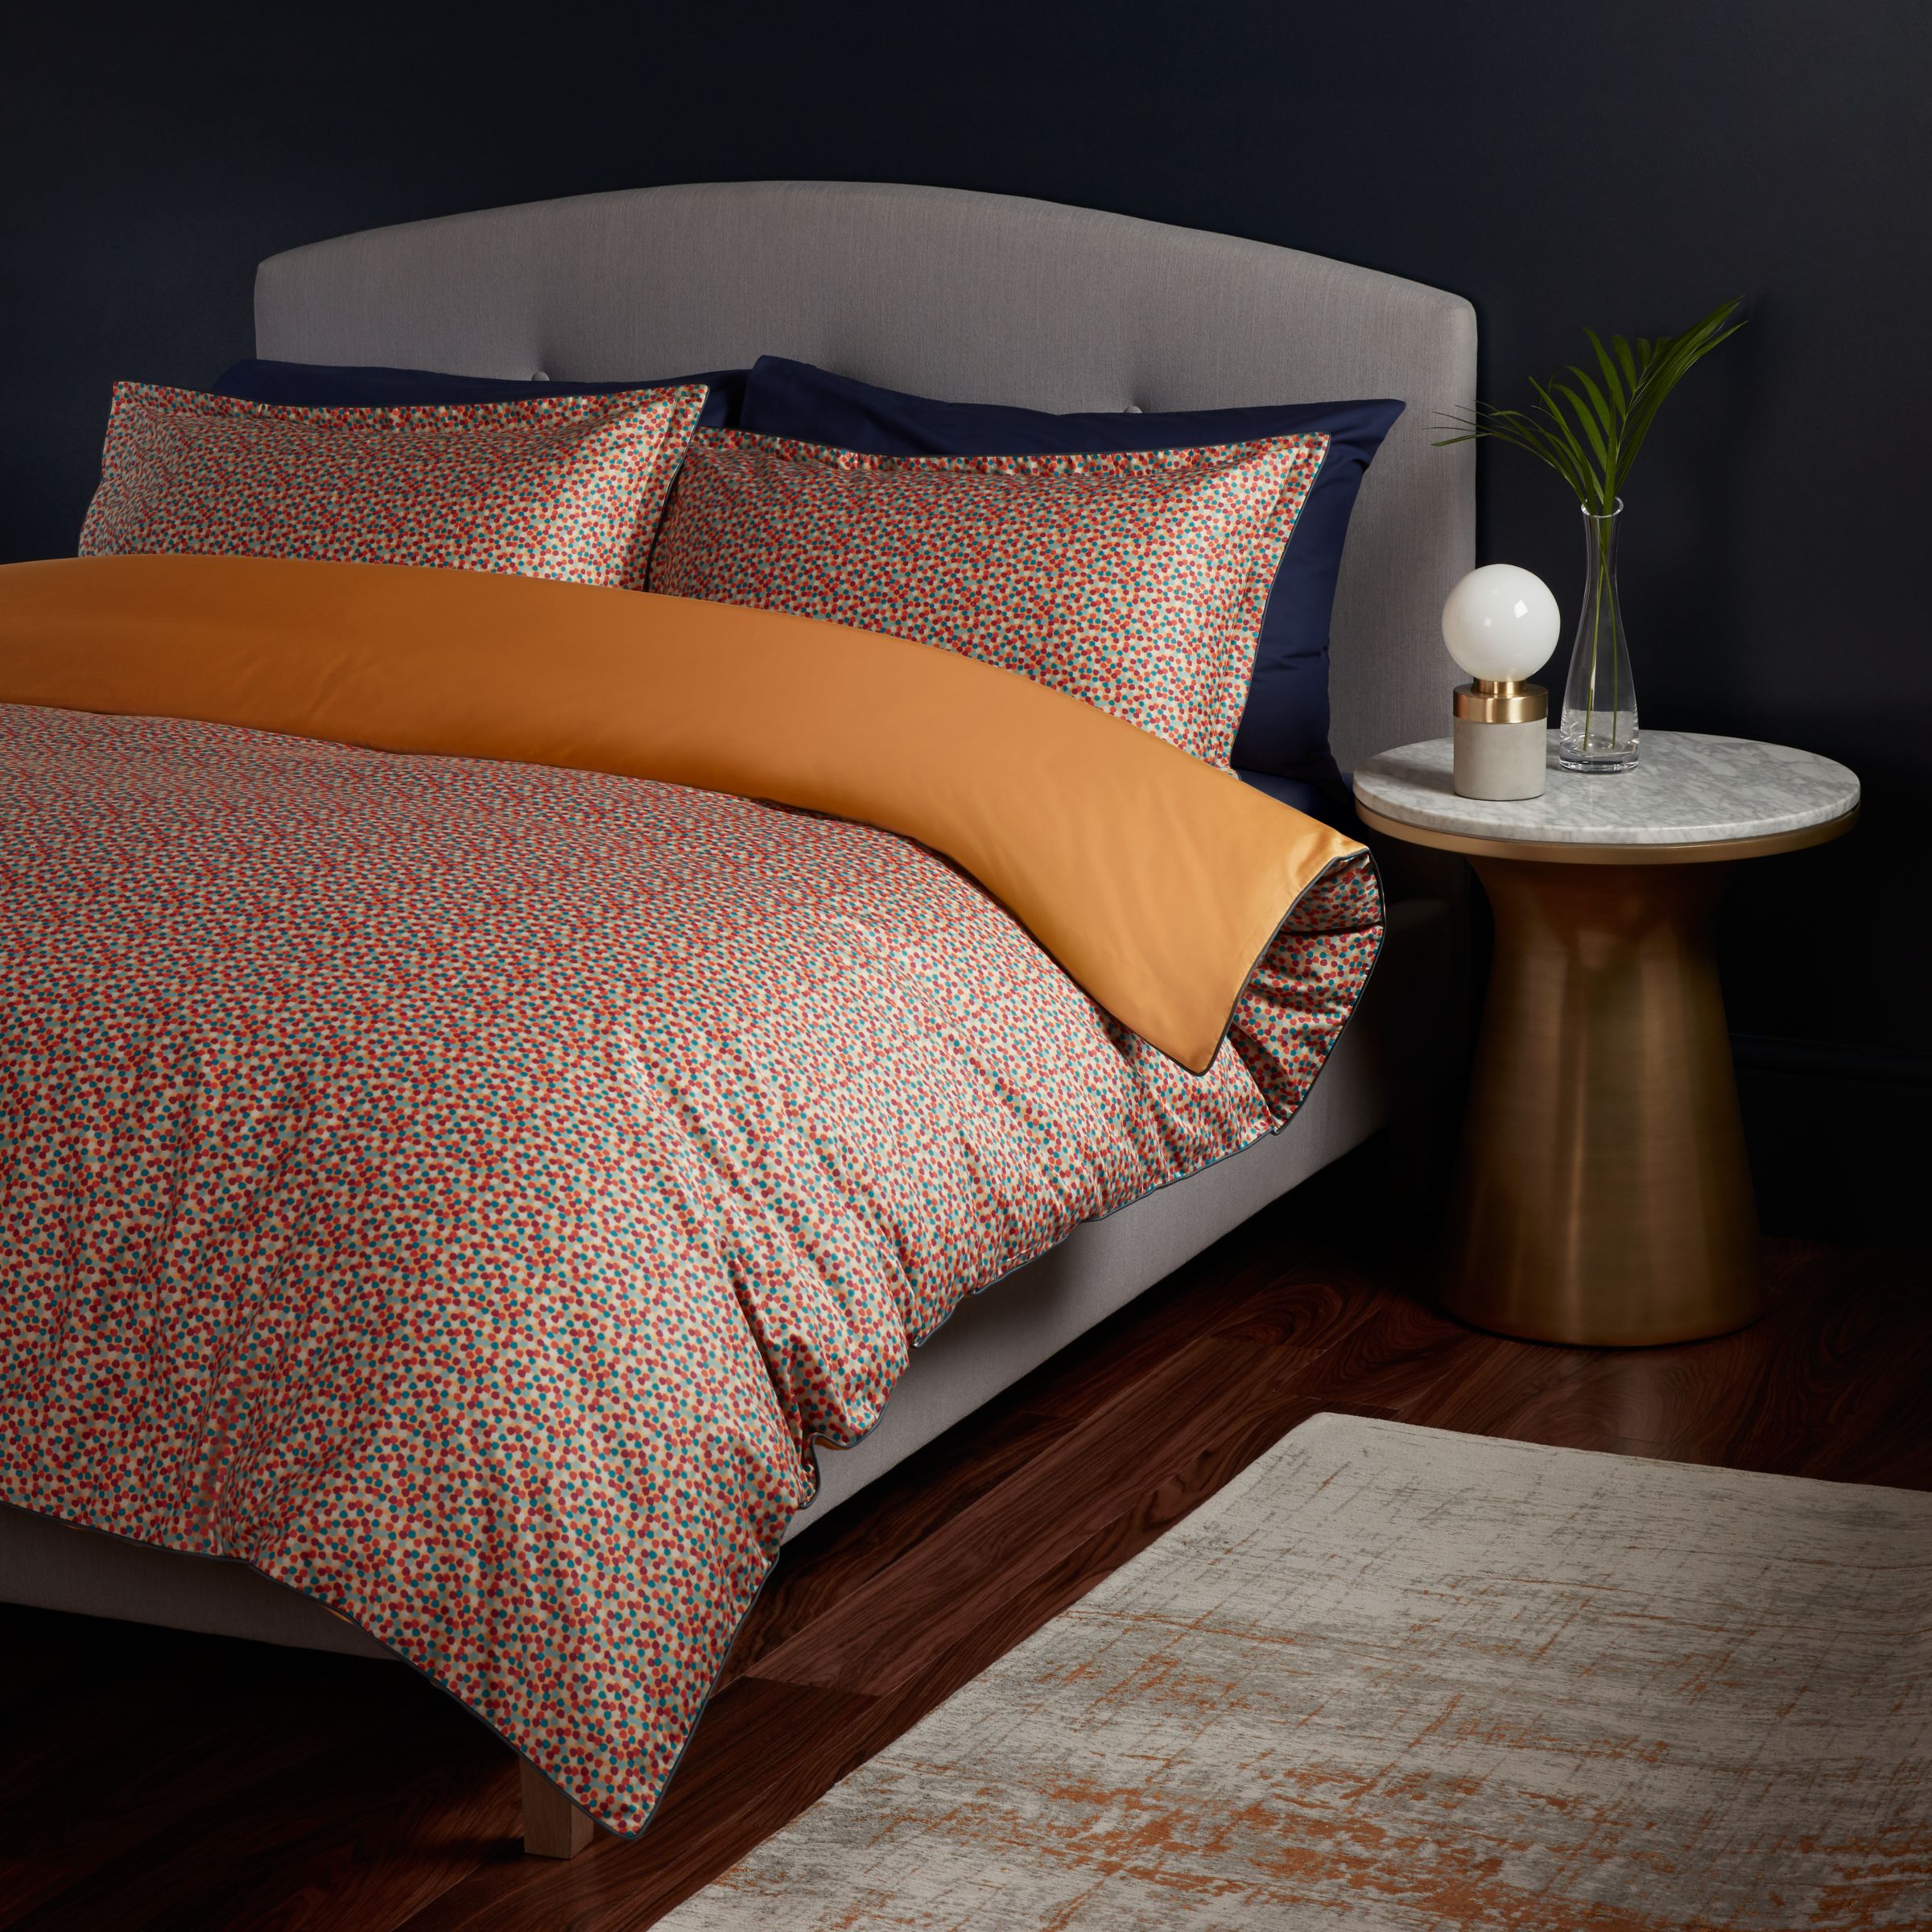 John Lewis & Partners Soft and Silky Carnival Cotton Bedding